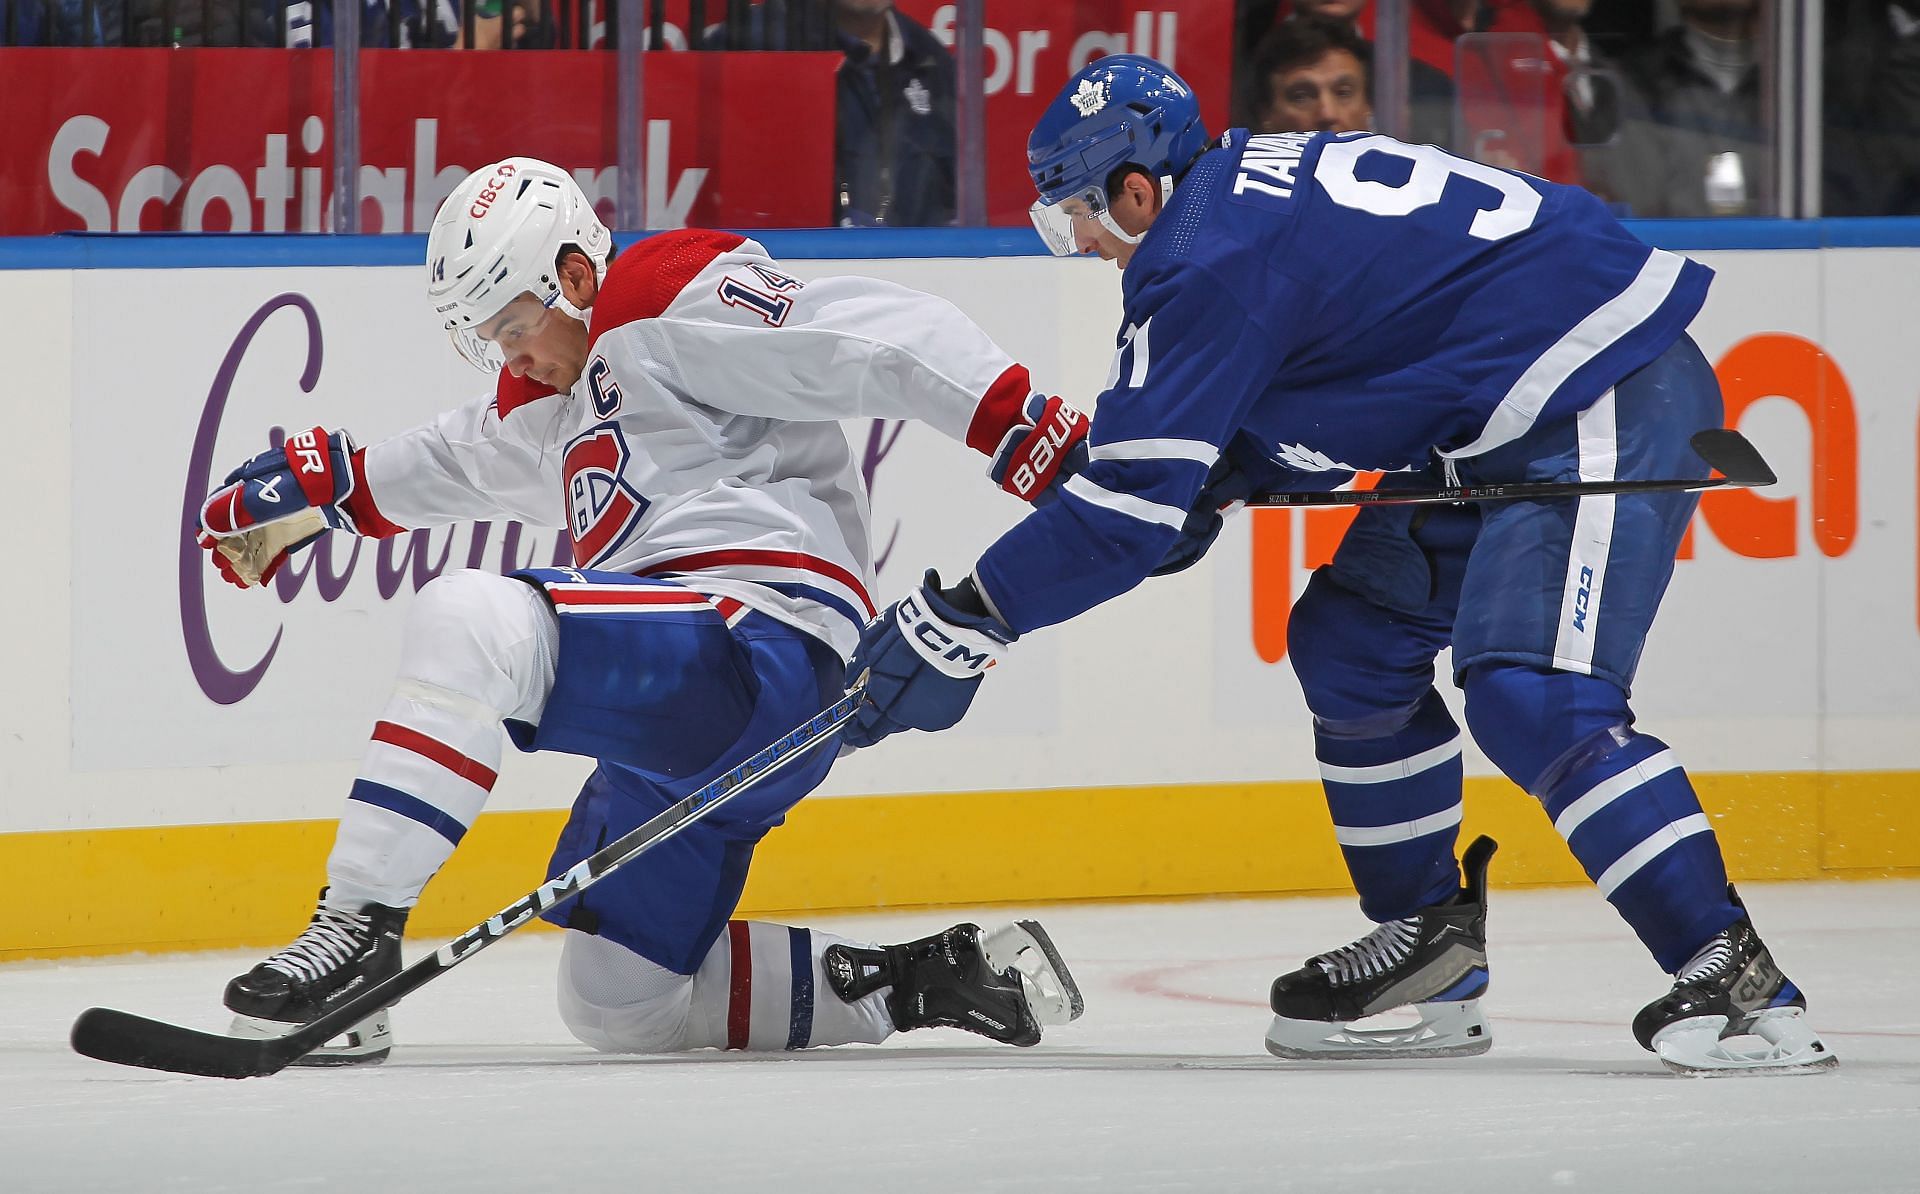 Toronto Maple Leafs vs Montreal Canadiens Live streaming options